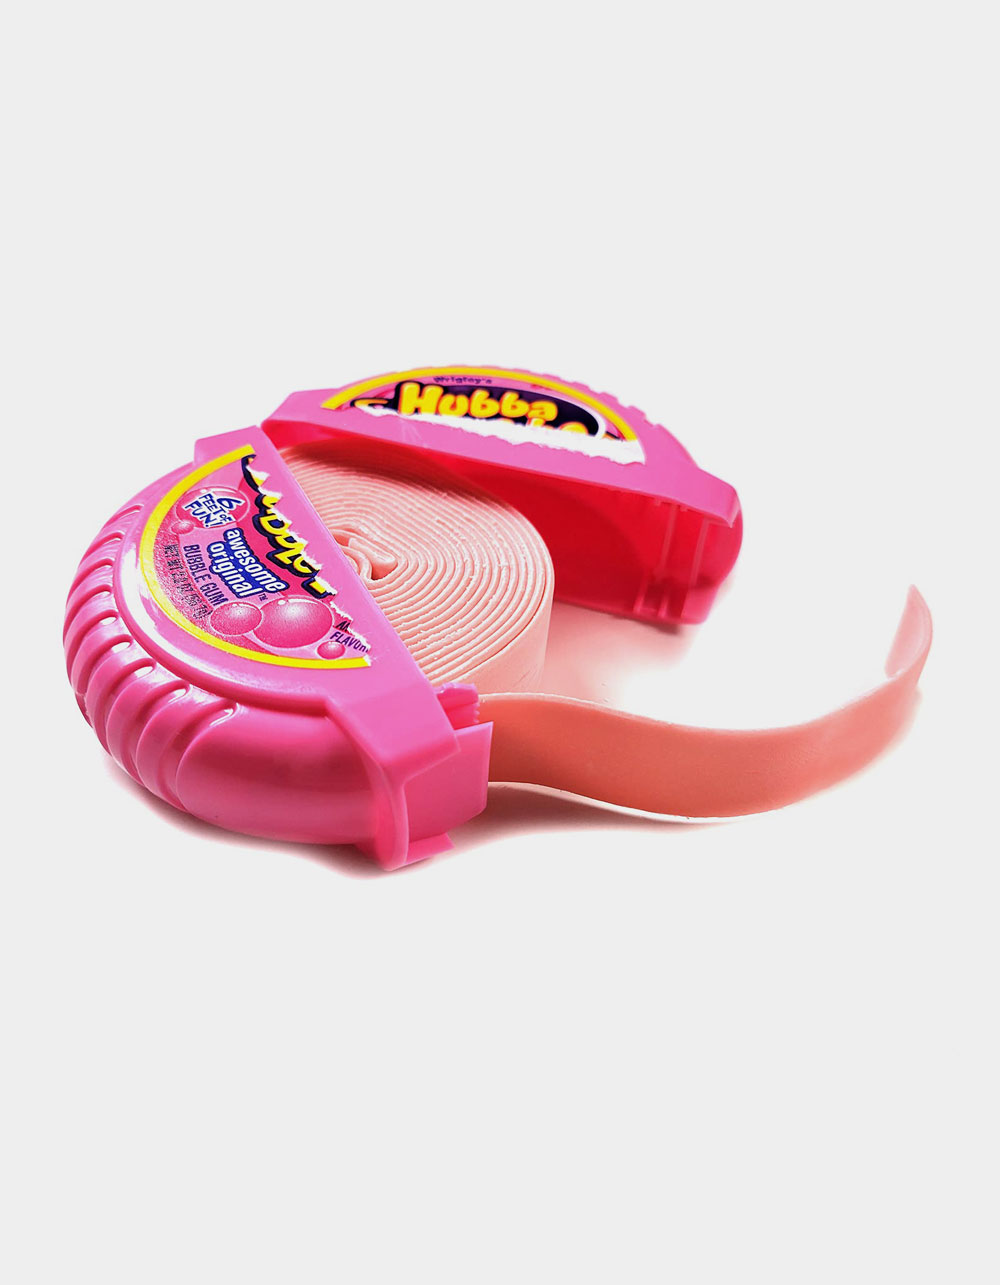 Hubba Bubba Bubble Tape Bubble Gum, Awesome Original - 6 pack, 2 oz packages